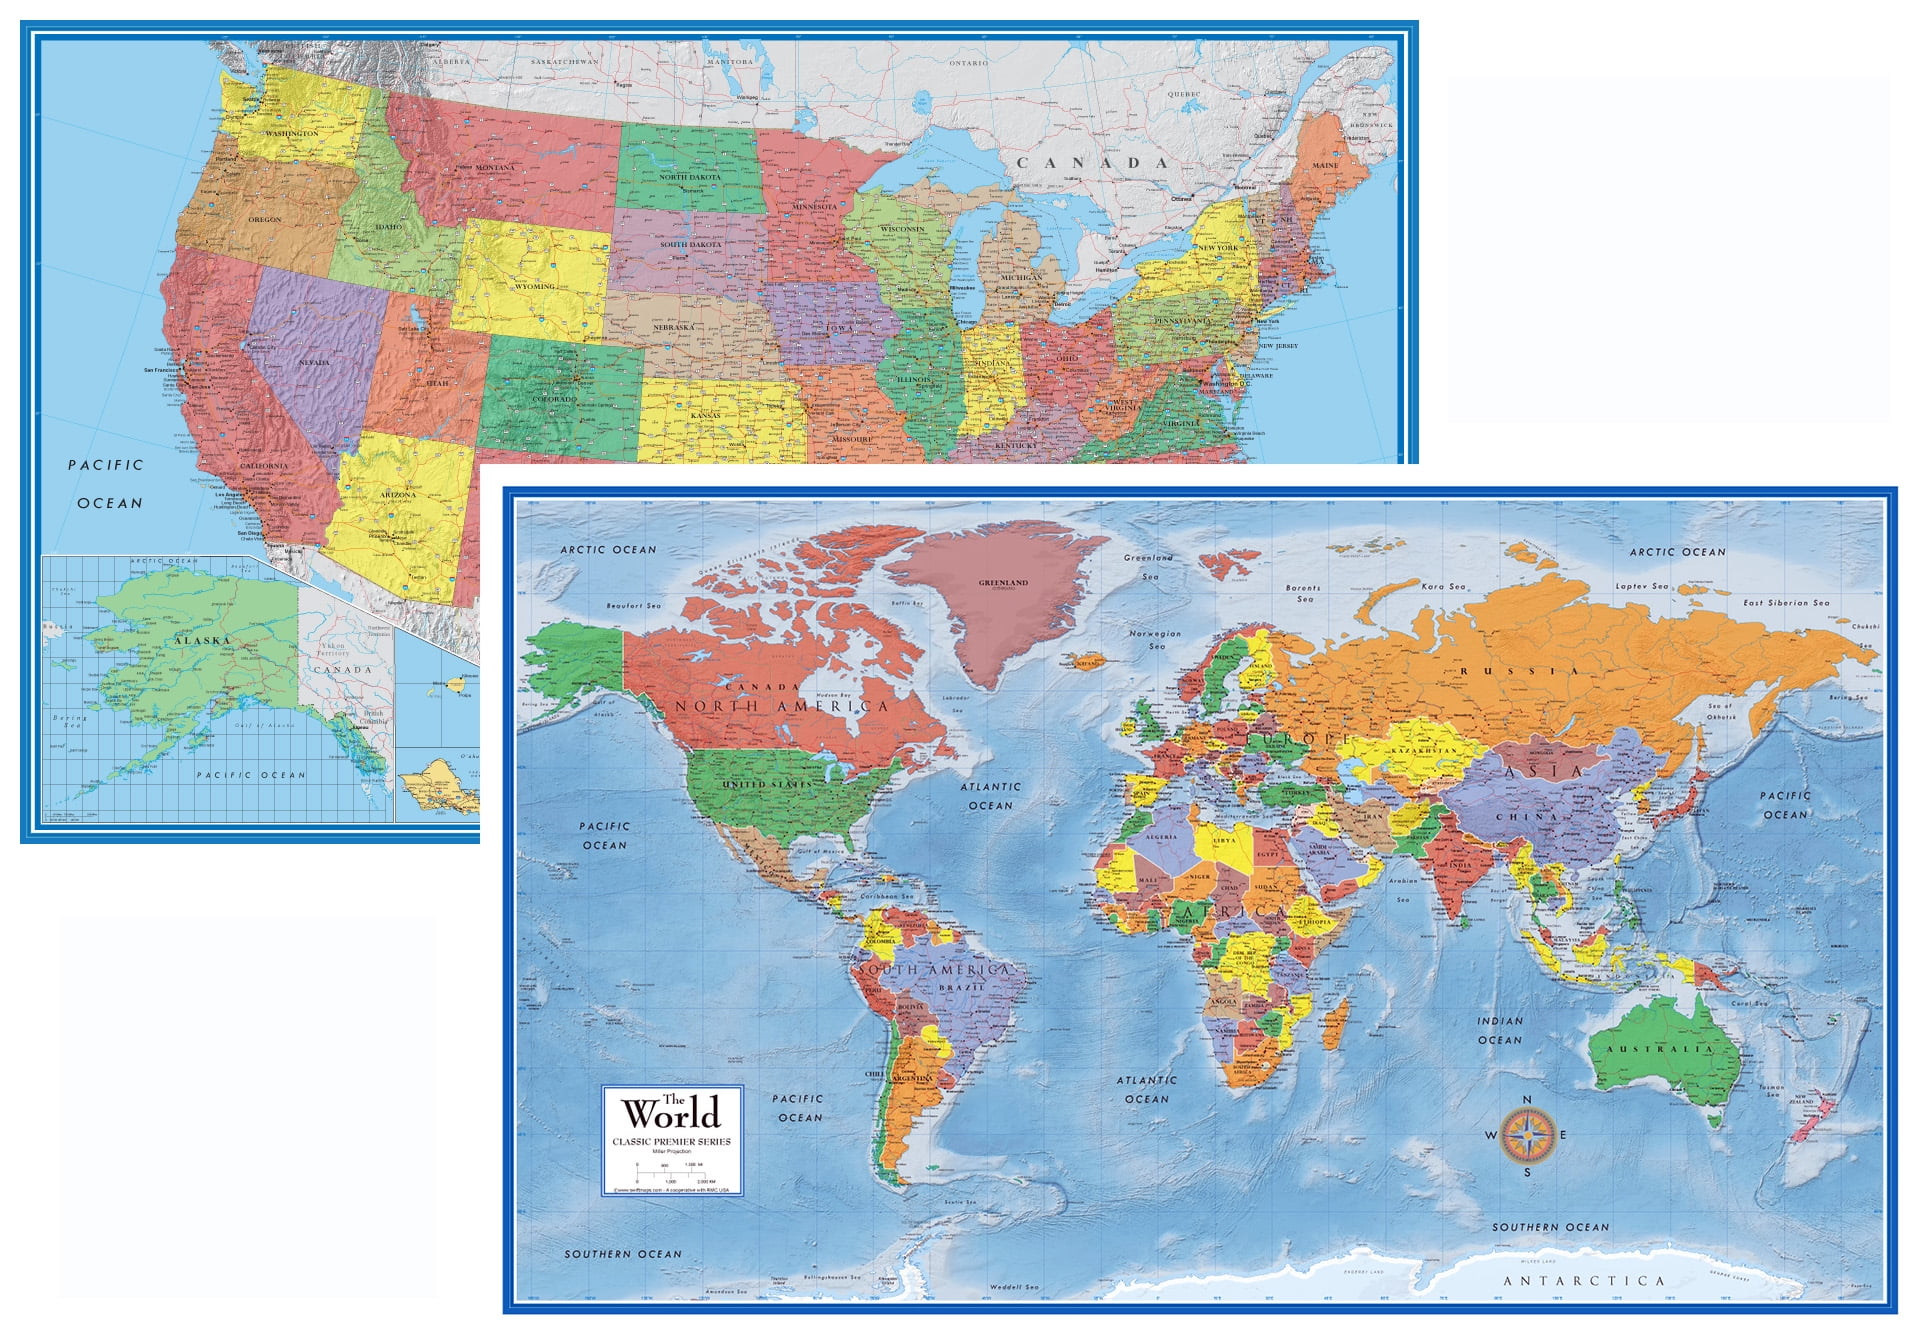 Wall Map USA Map with County Names 36" x 28.75" Laminated 